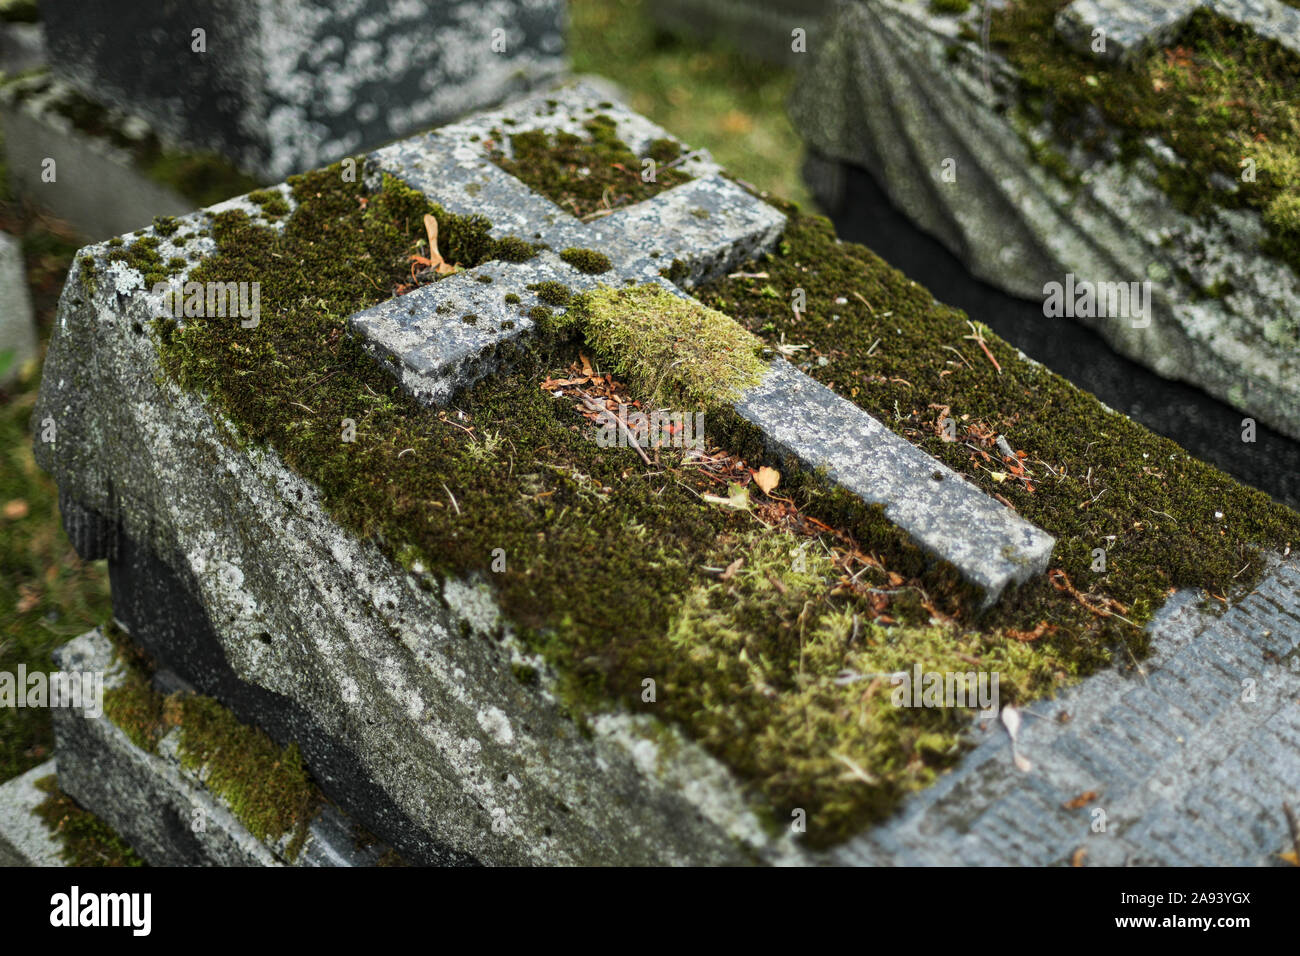 Sculptured gravestone with a cross, covered with moss Stock Photo